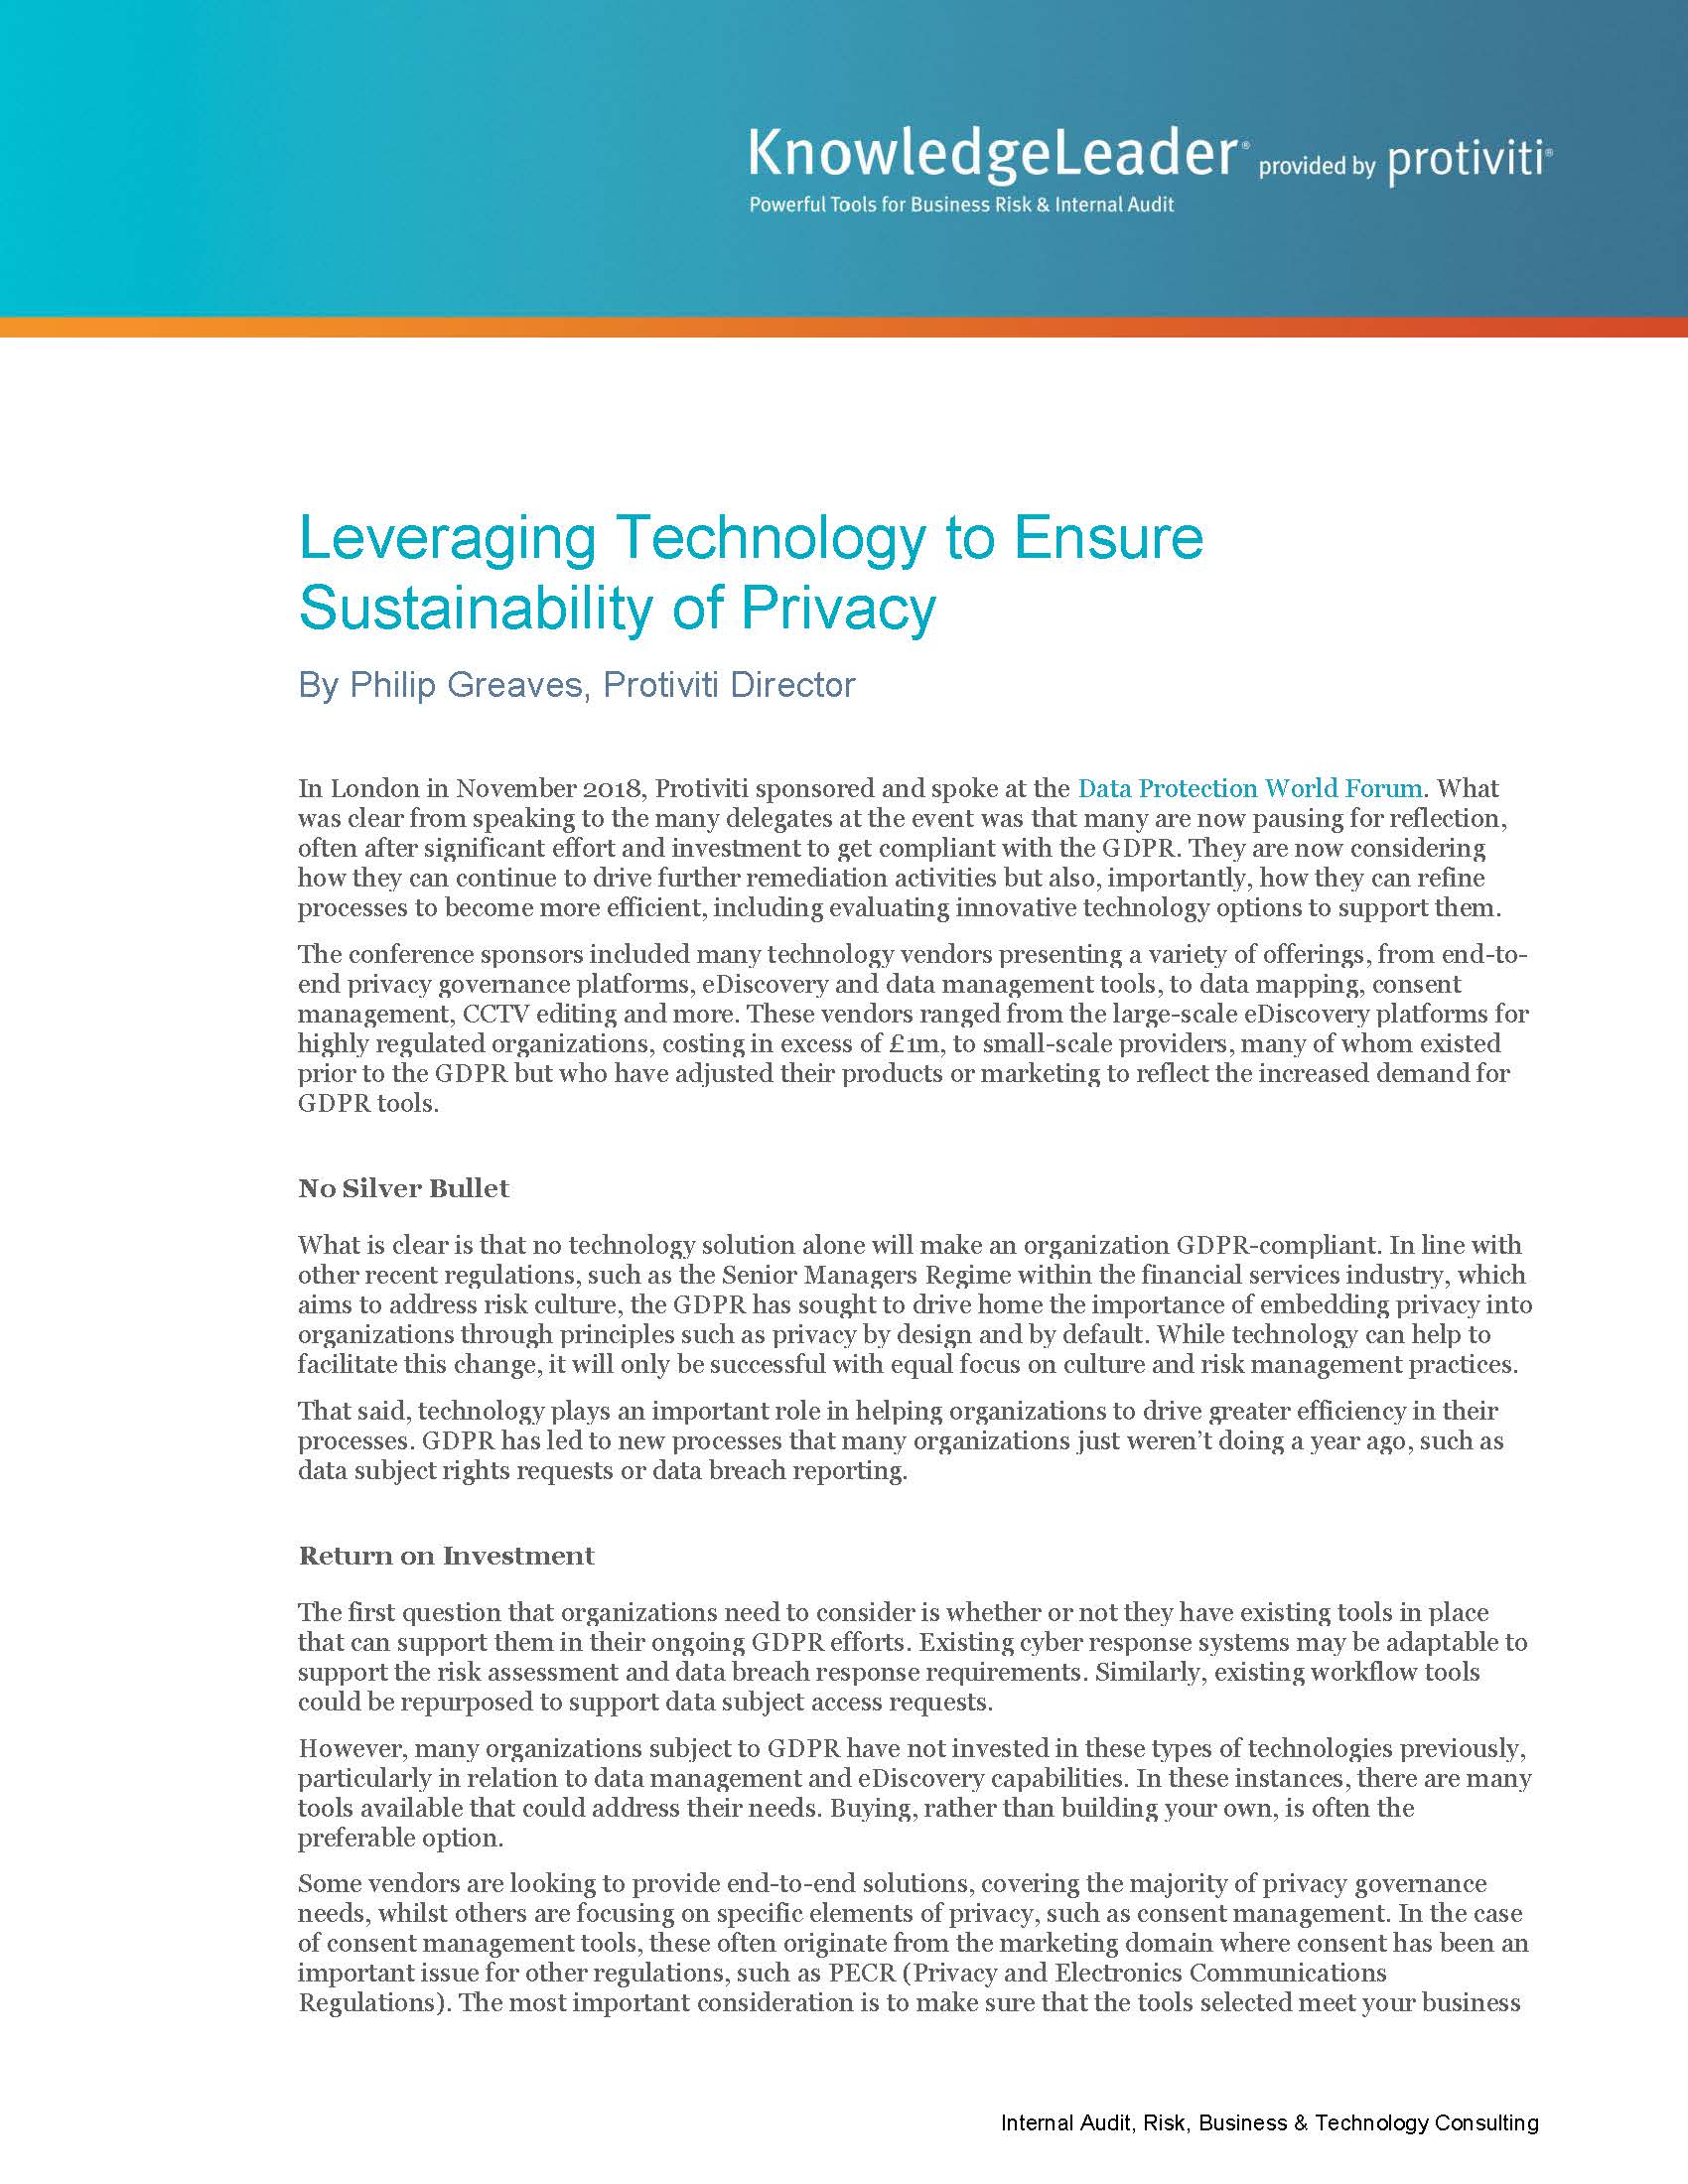 Screenshot of the first page of Leveraging Technology to Ensure Sustainability of Privacy